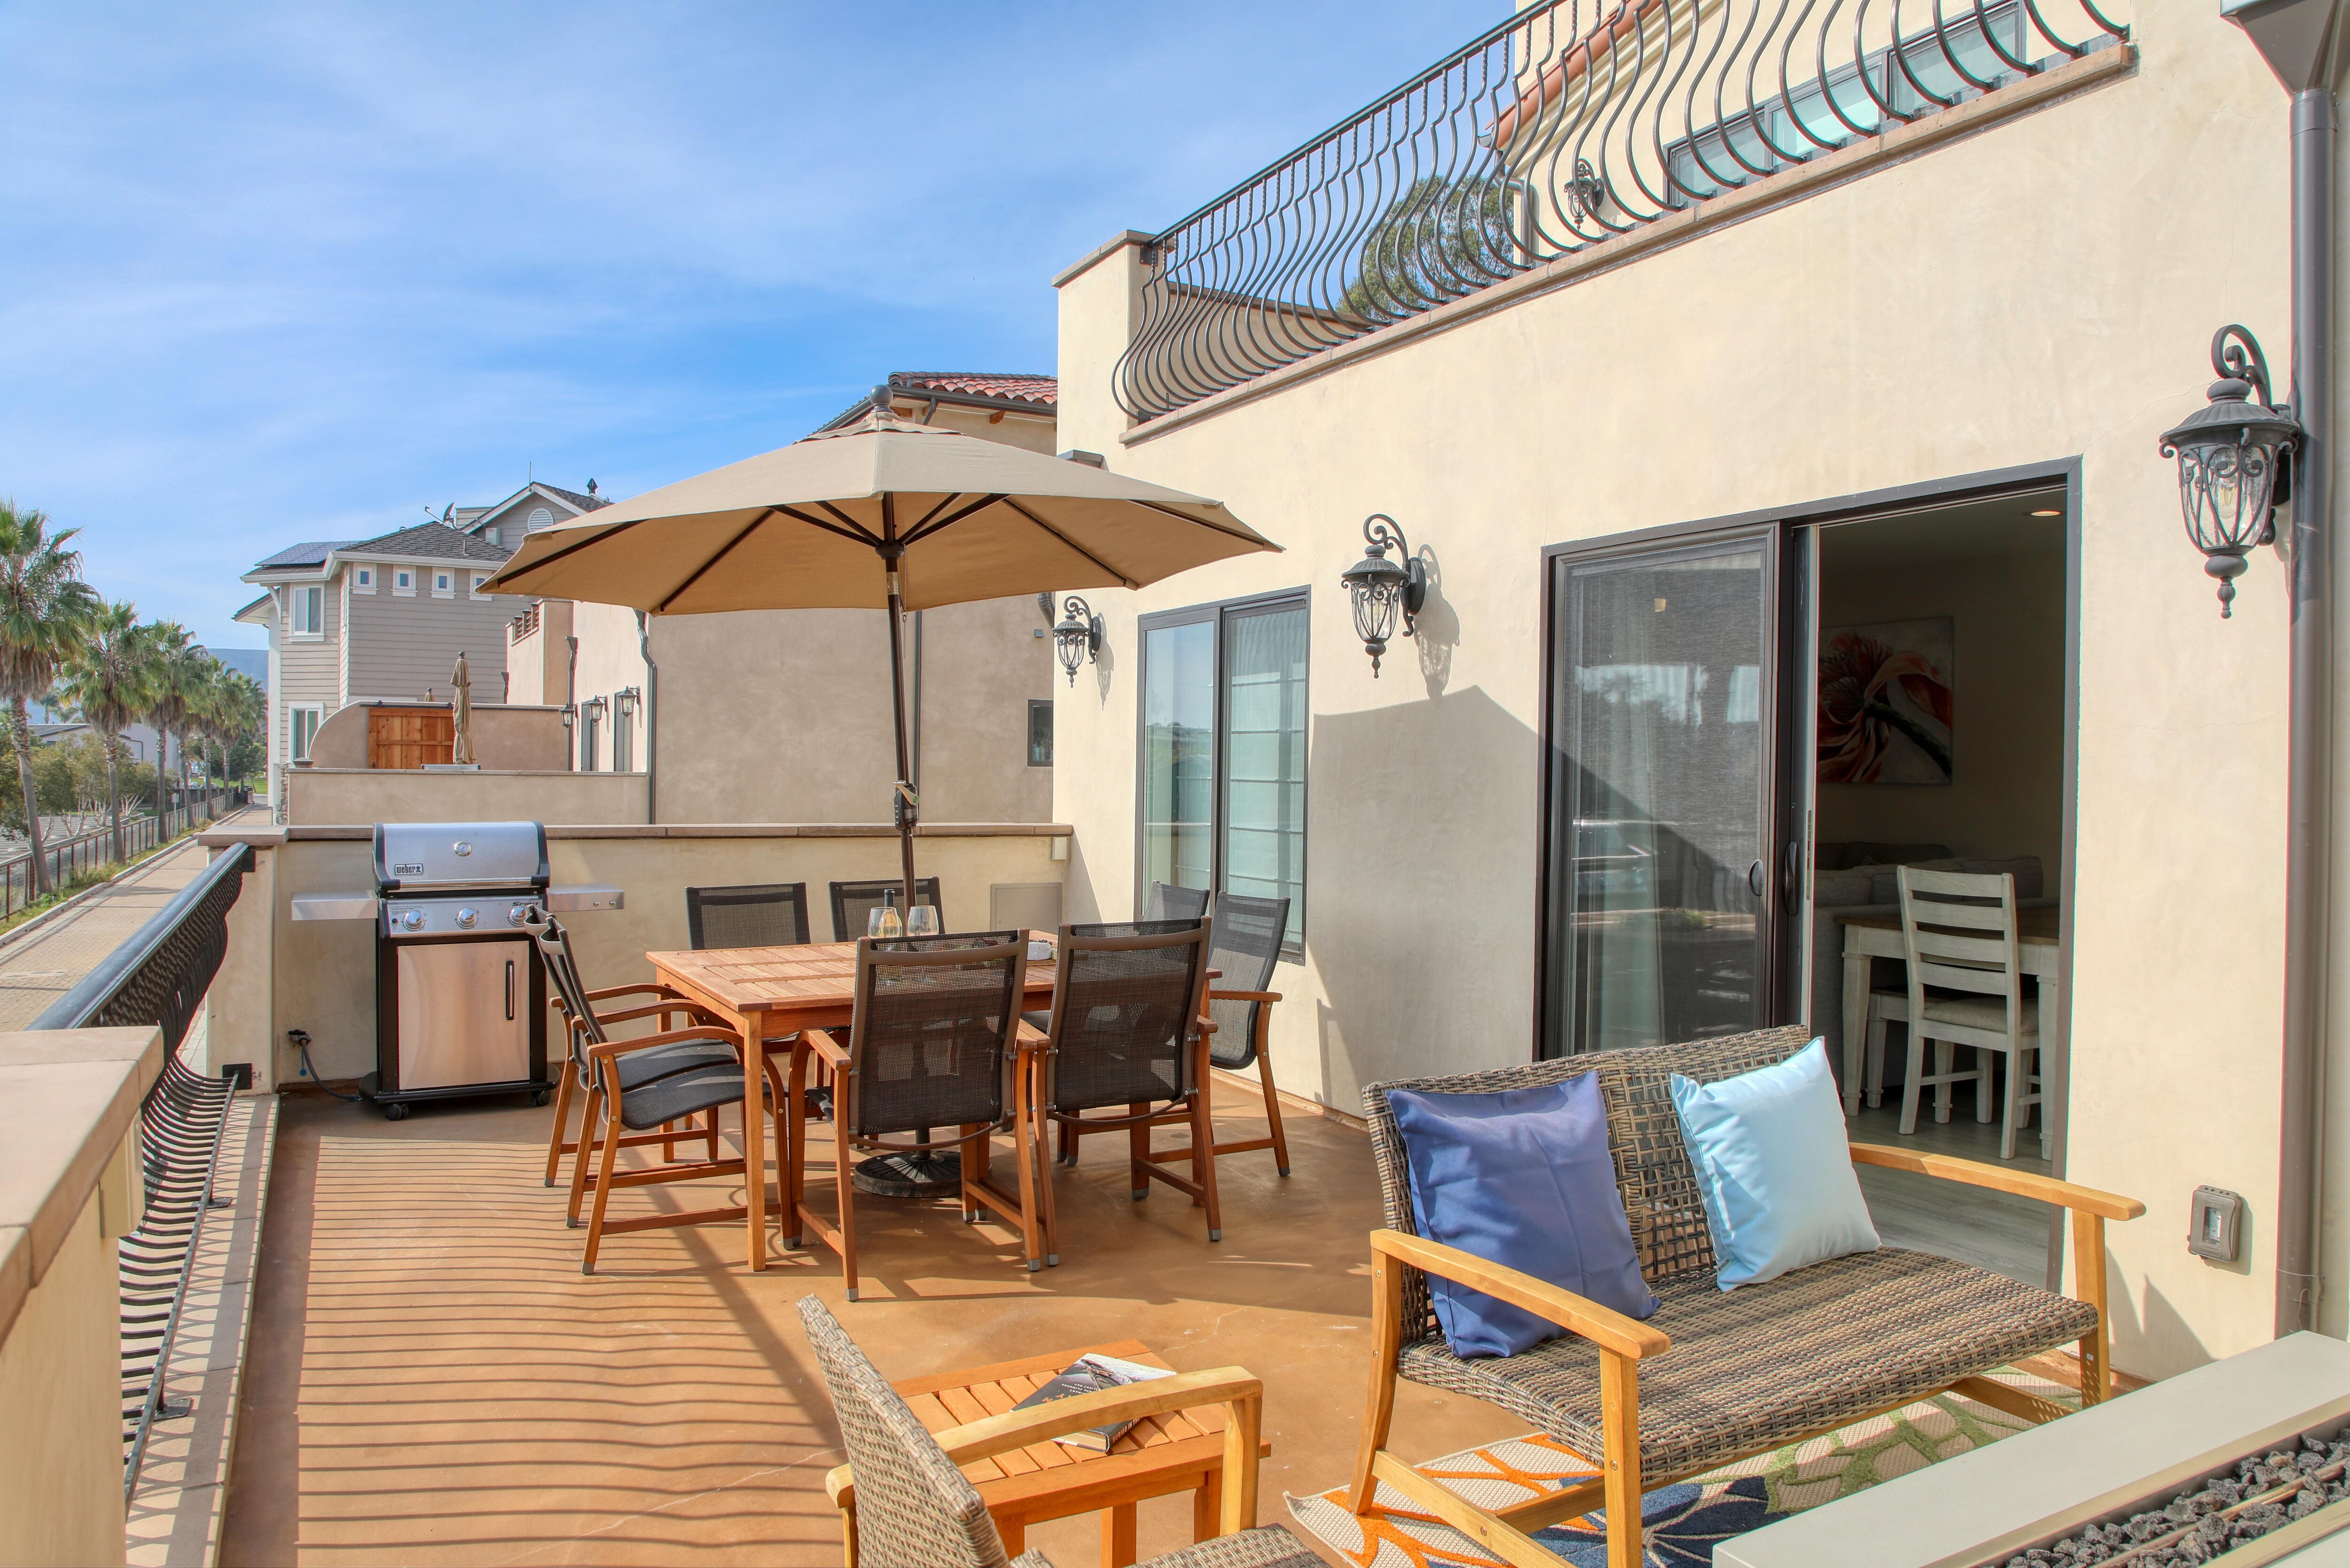 Large balcony with dining for 6 guests, natural gas BBQ and seating with a fire table .